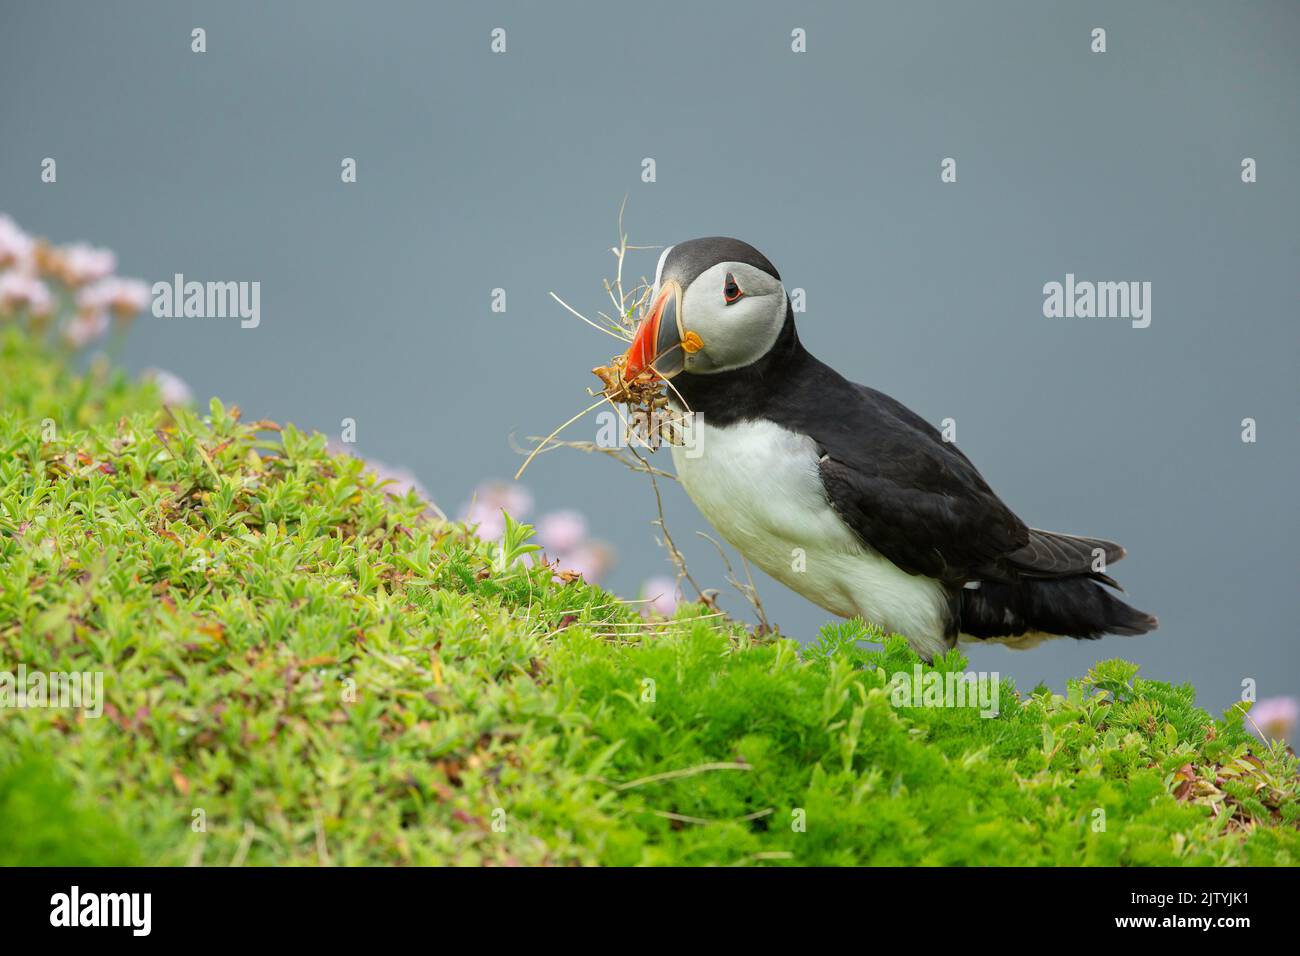 Puffin (Fratercula arctica) with nesting material, Great saltee Island, Co. Wexford, Republic of Ireland Stock Photo